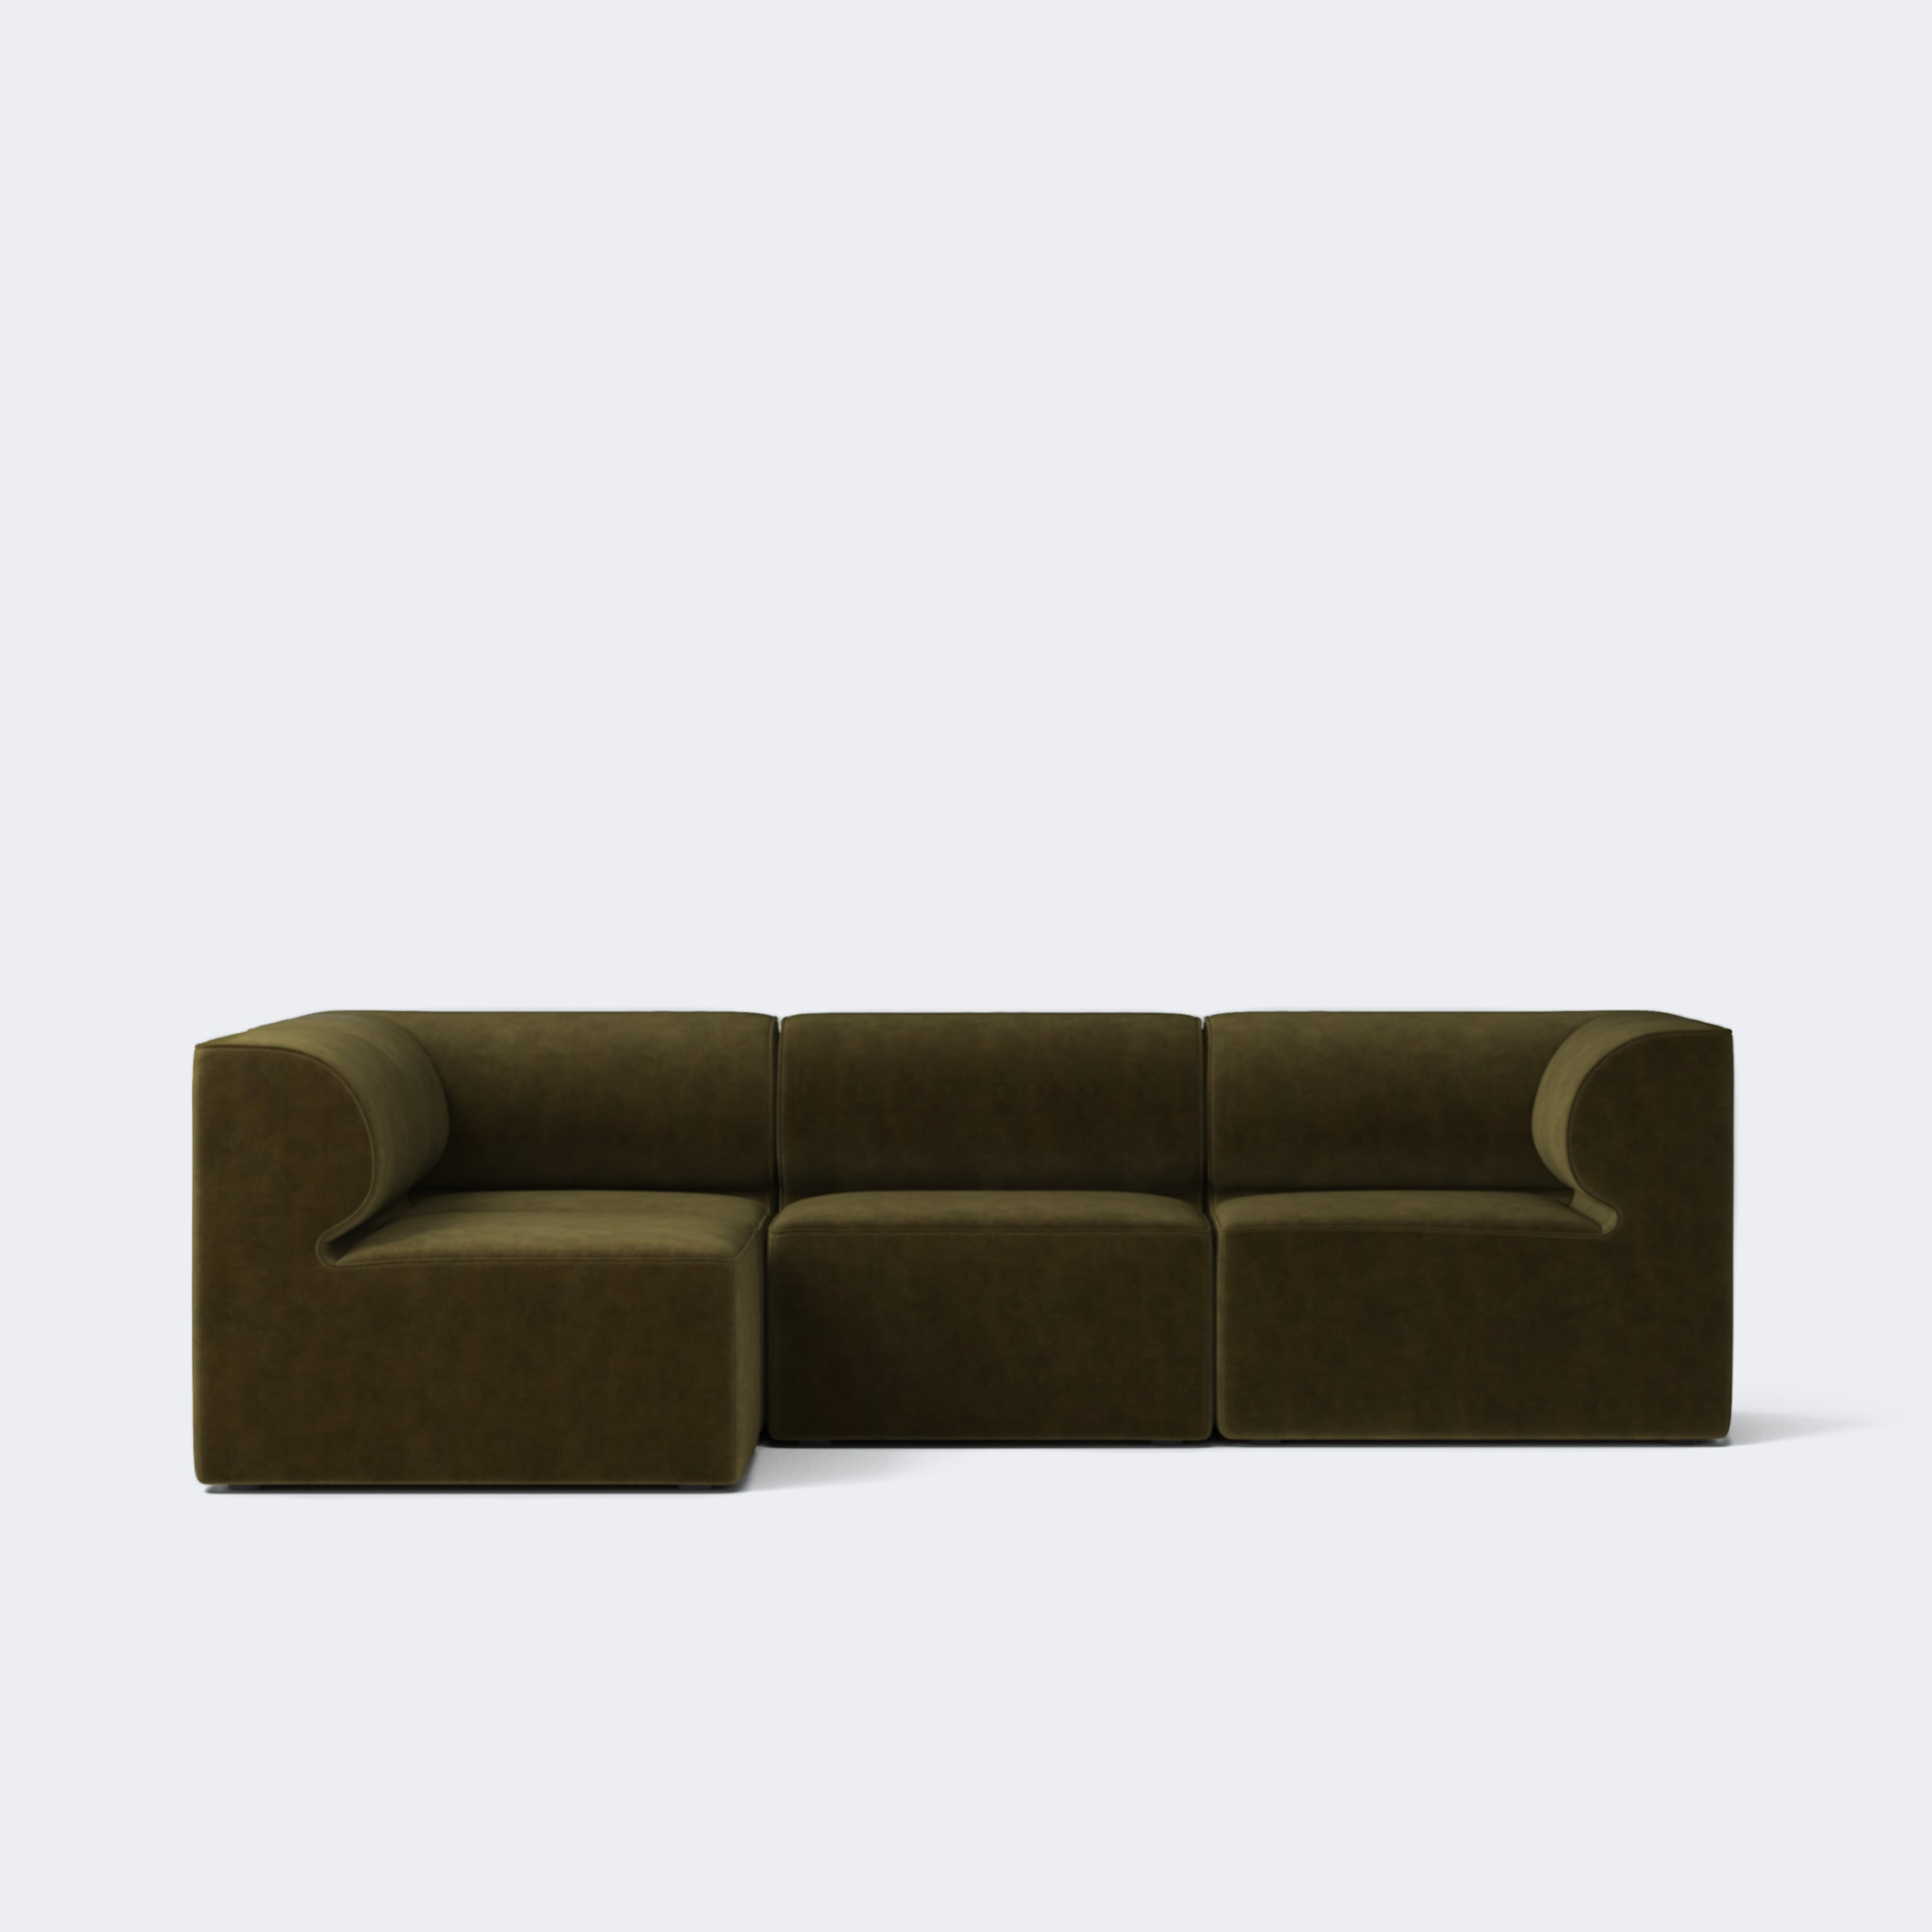 Audo Copenhagen Eave Sectional Sofa, 4-Seater Made To Order (10-12 Weeks) 4-Seater | Left Section Champion #035 - KANSO